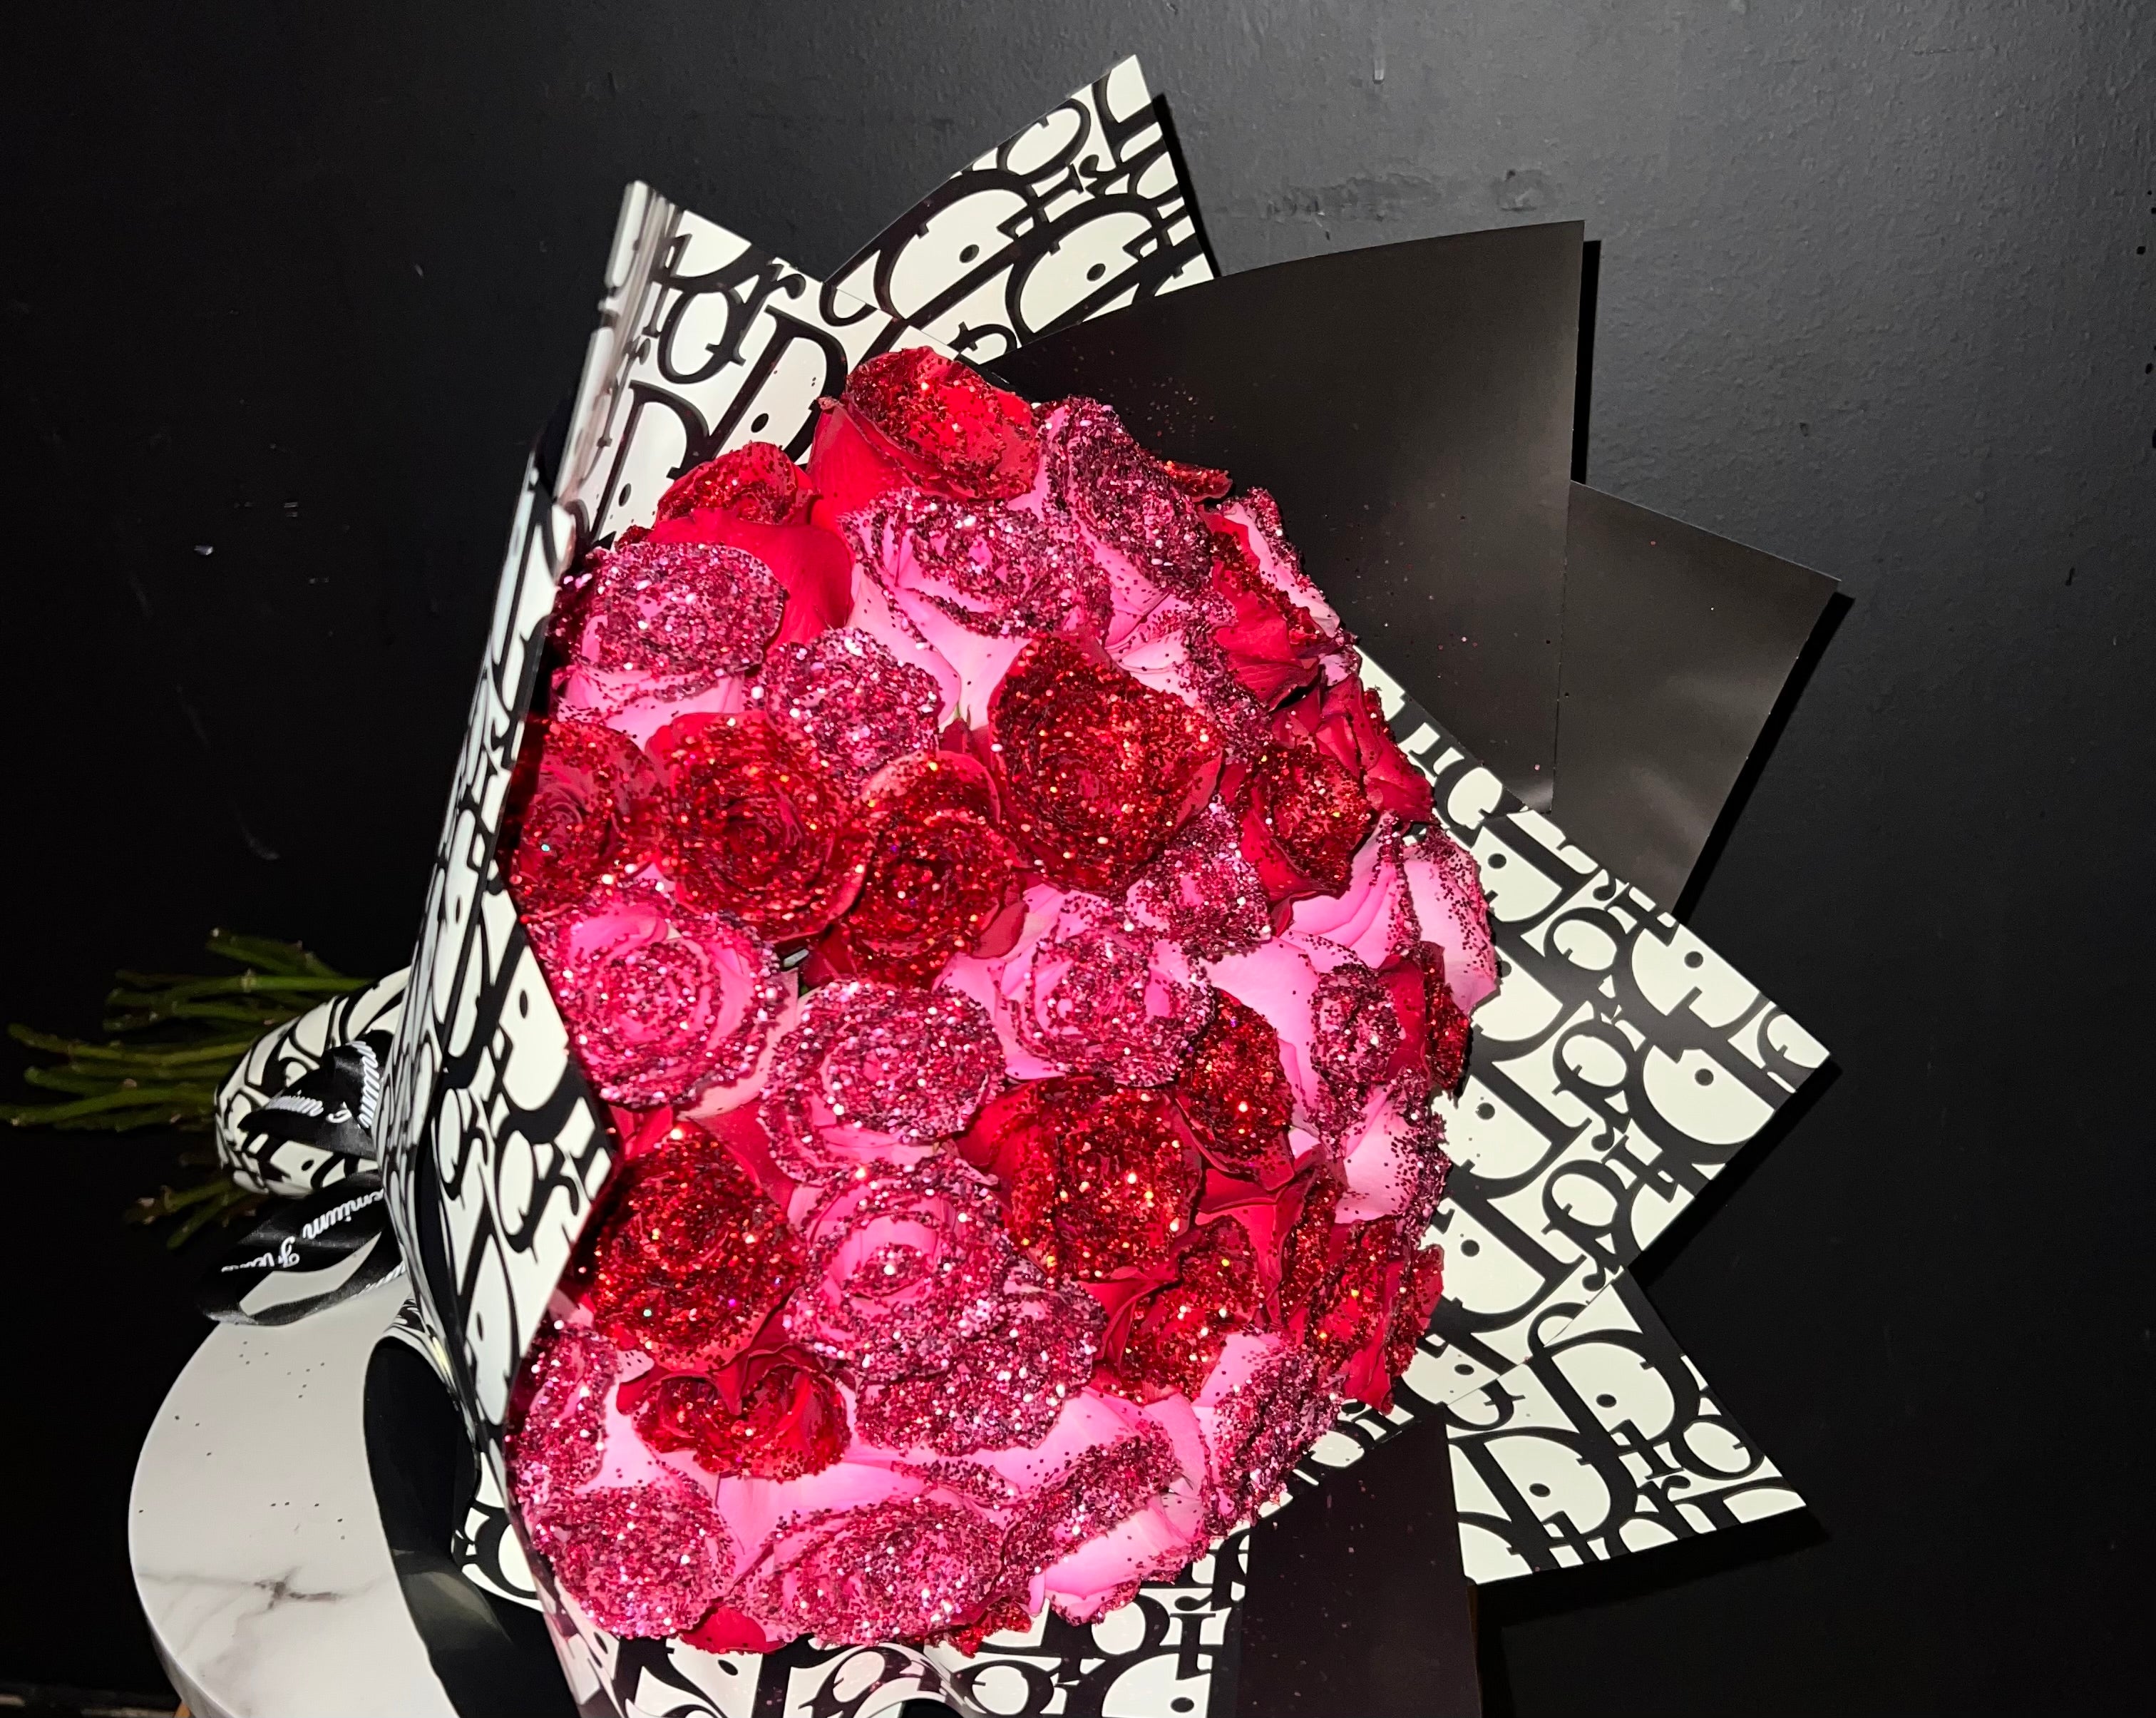 United Flower Wholesale on Instagram: New designer floral wrapping paper:  Dior! We also have LV and a lot of other options of wrapping paper and  bouquet bags. #floralarrangement #floralwrappingpaper #wrappingpaper  #designer #flowershop #